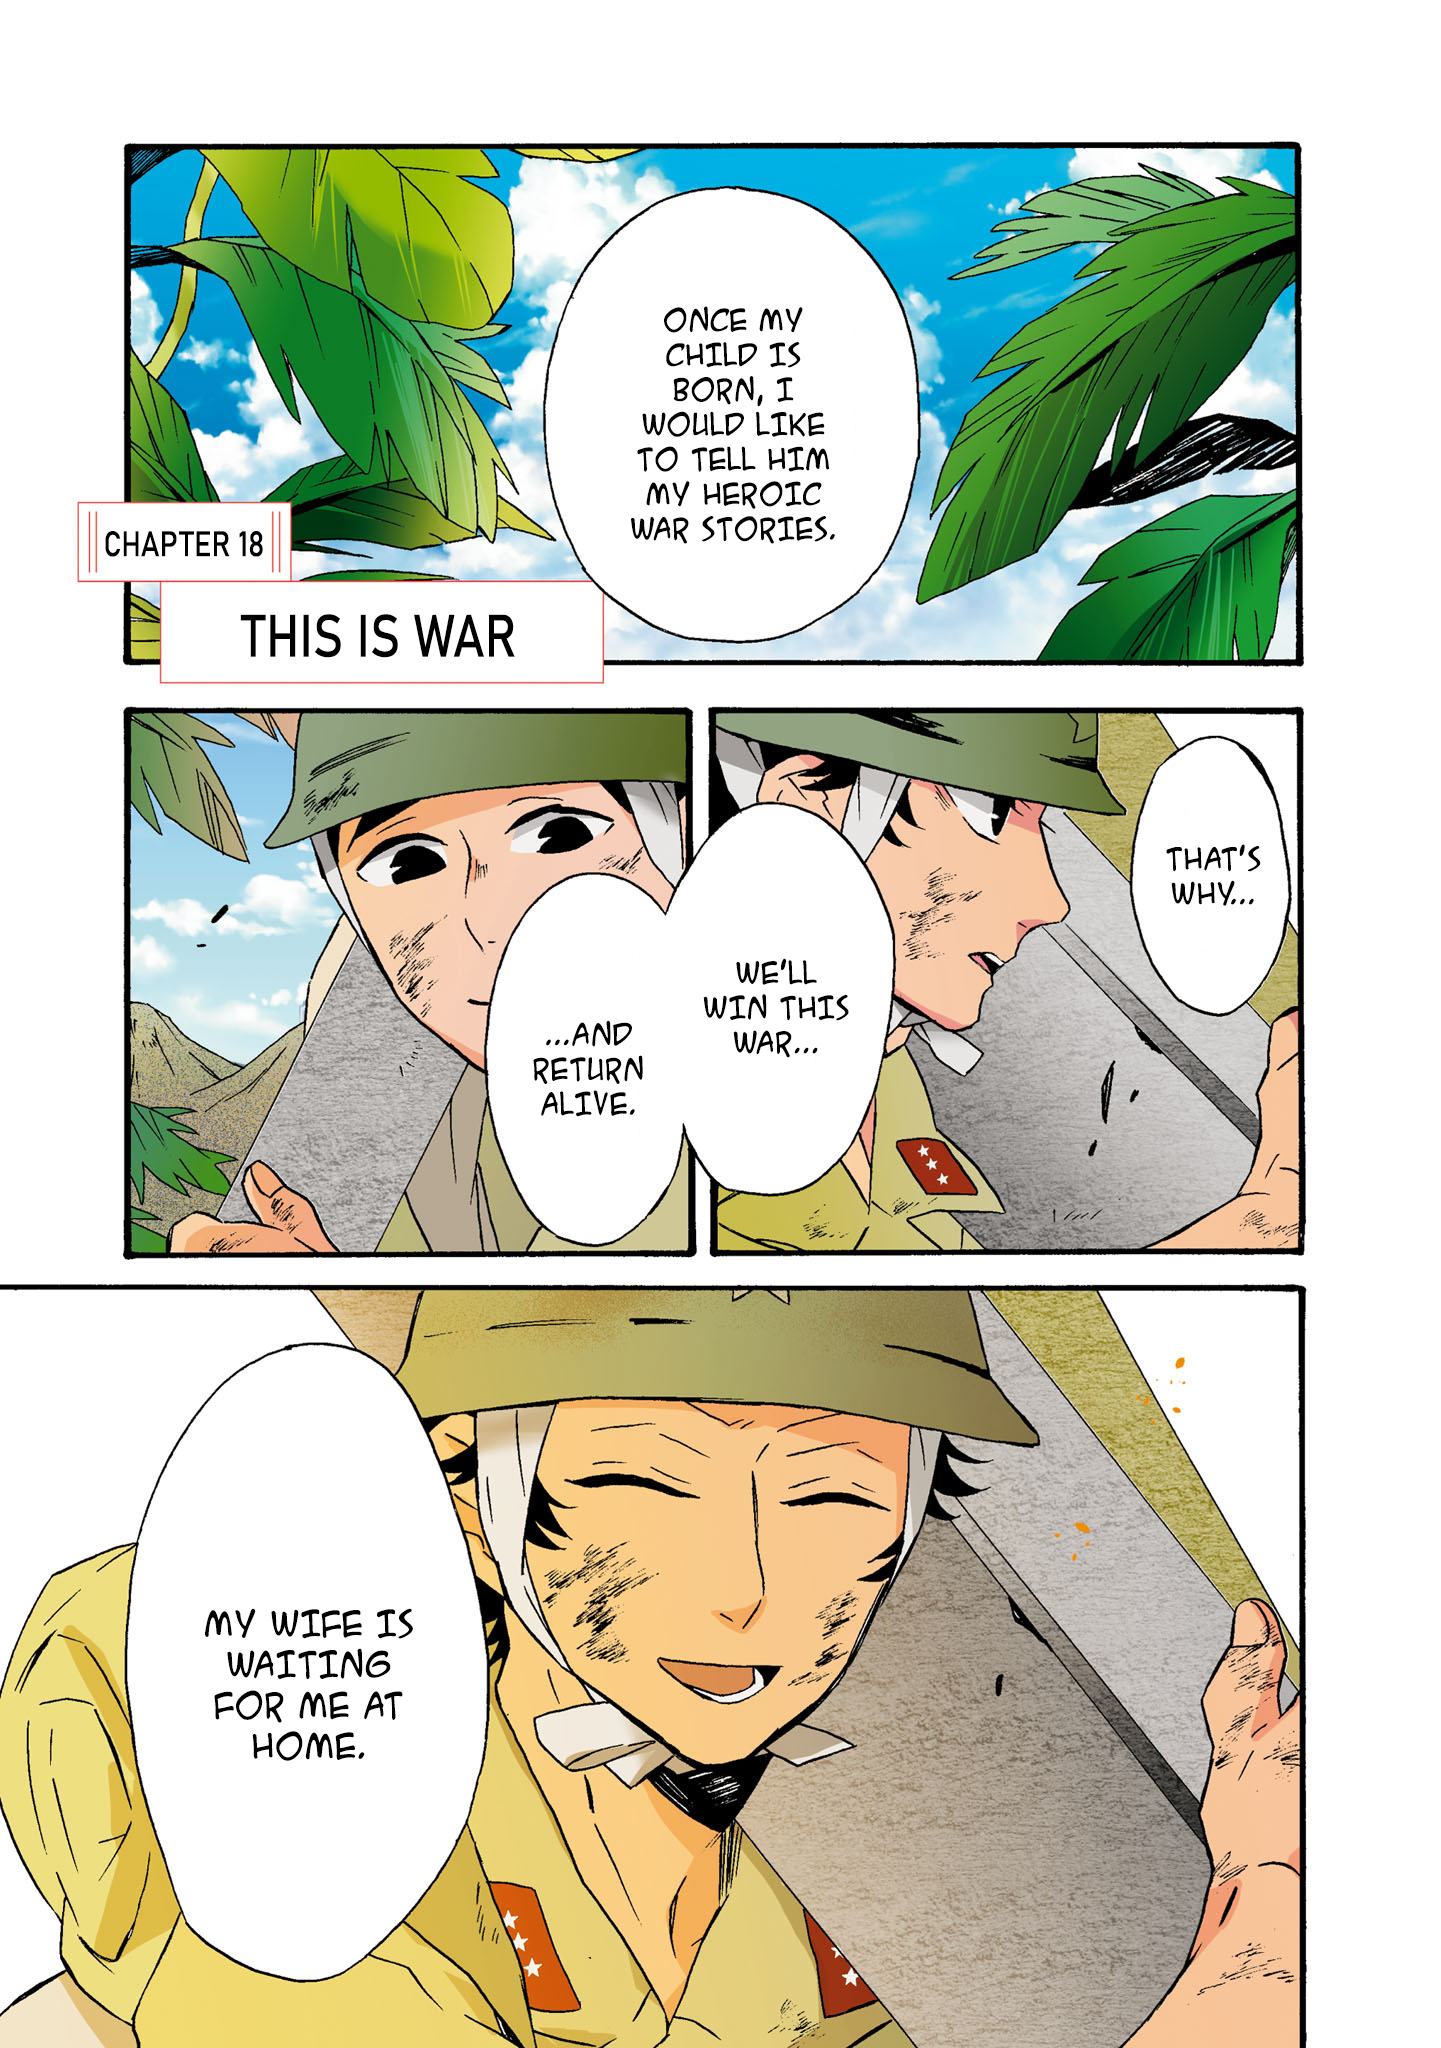 Will You Marry Me Again If You Are Reborn? Vol.4 Chapter 18: This Is War - Picture 3